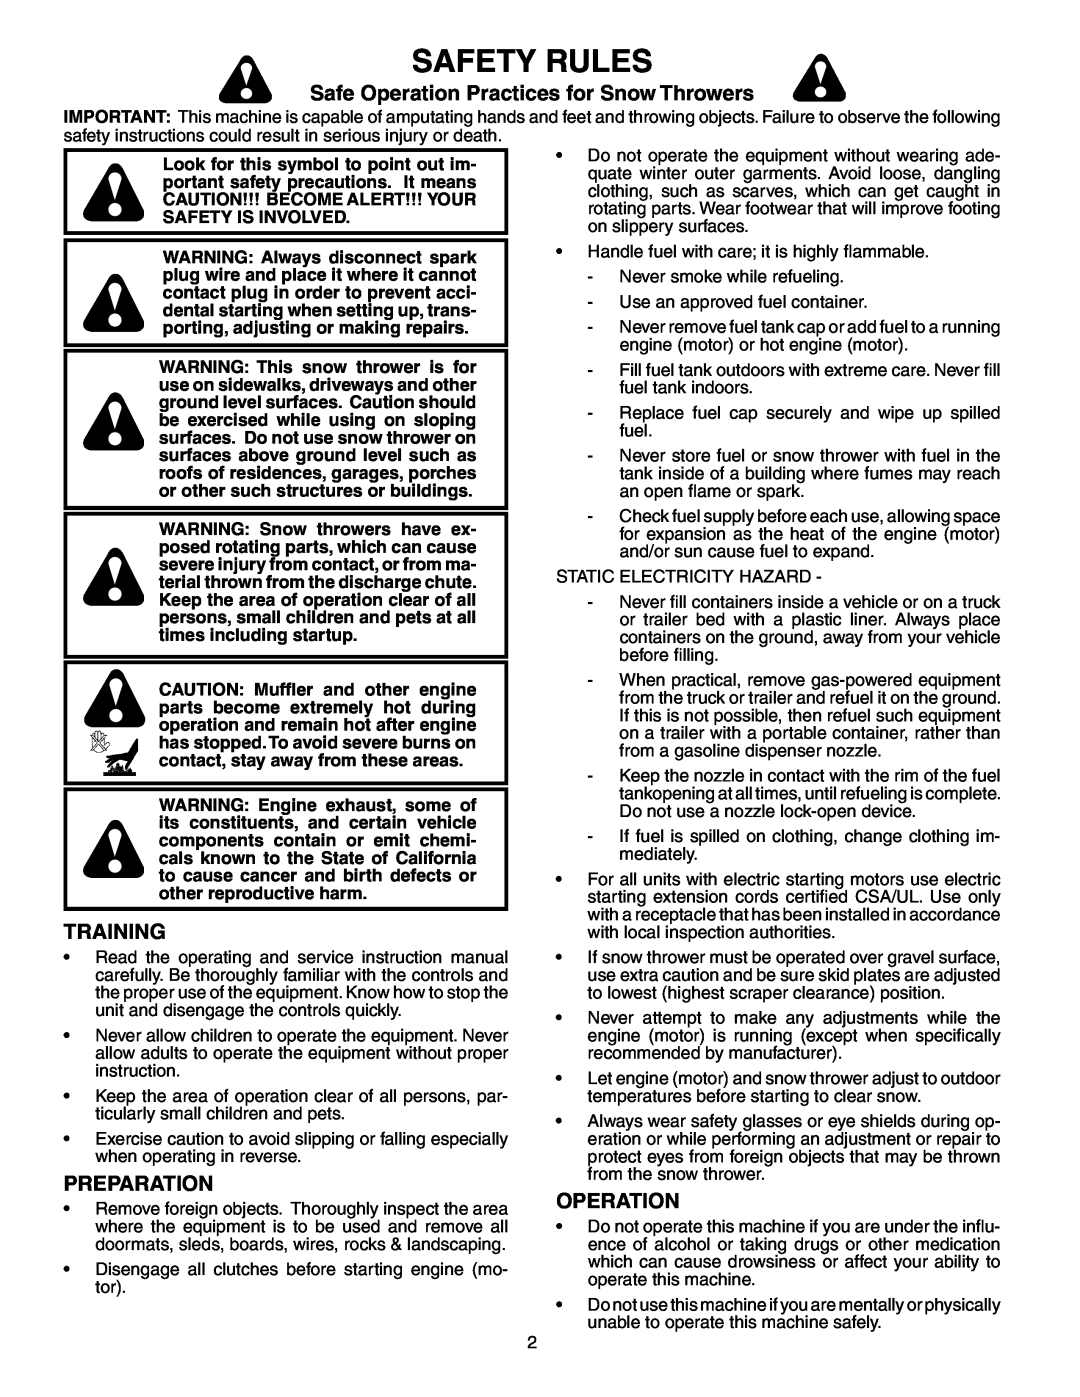 Poulan 192044 owner manual Safety Rules, Safe Operation Practices for Snow Throwers, Training, Preparation 